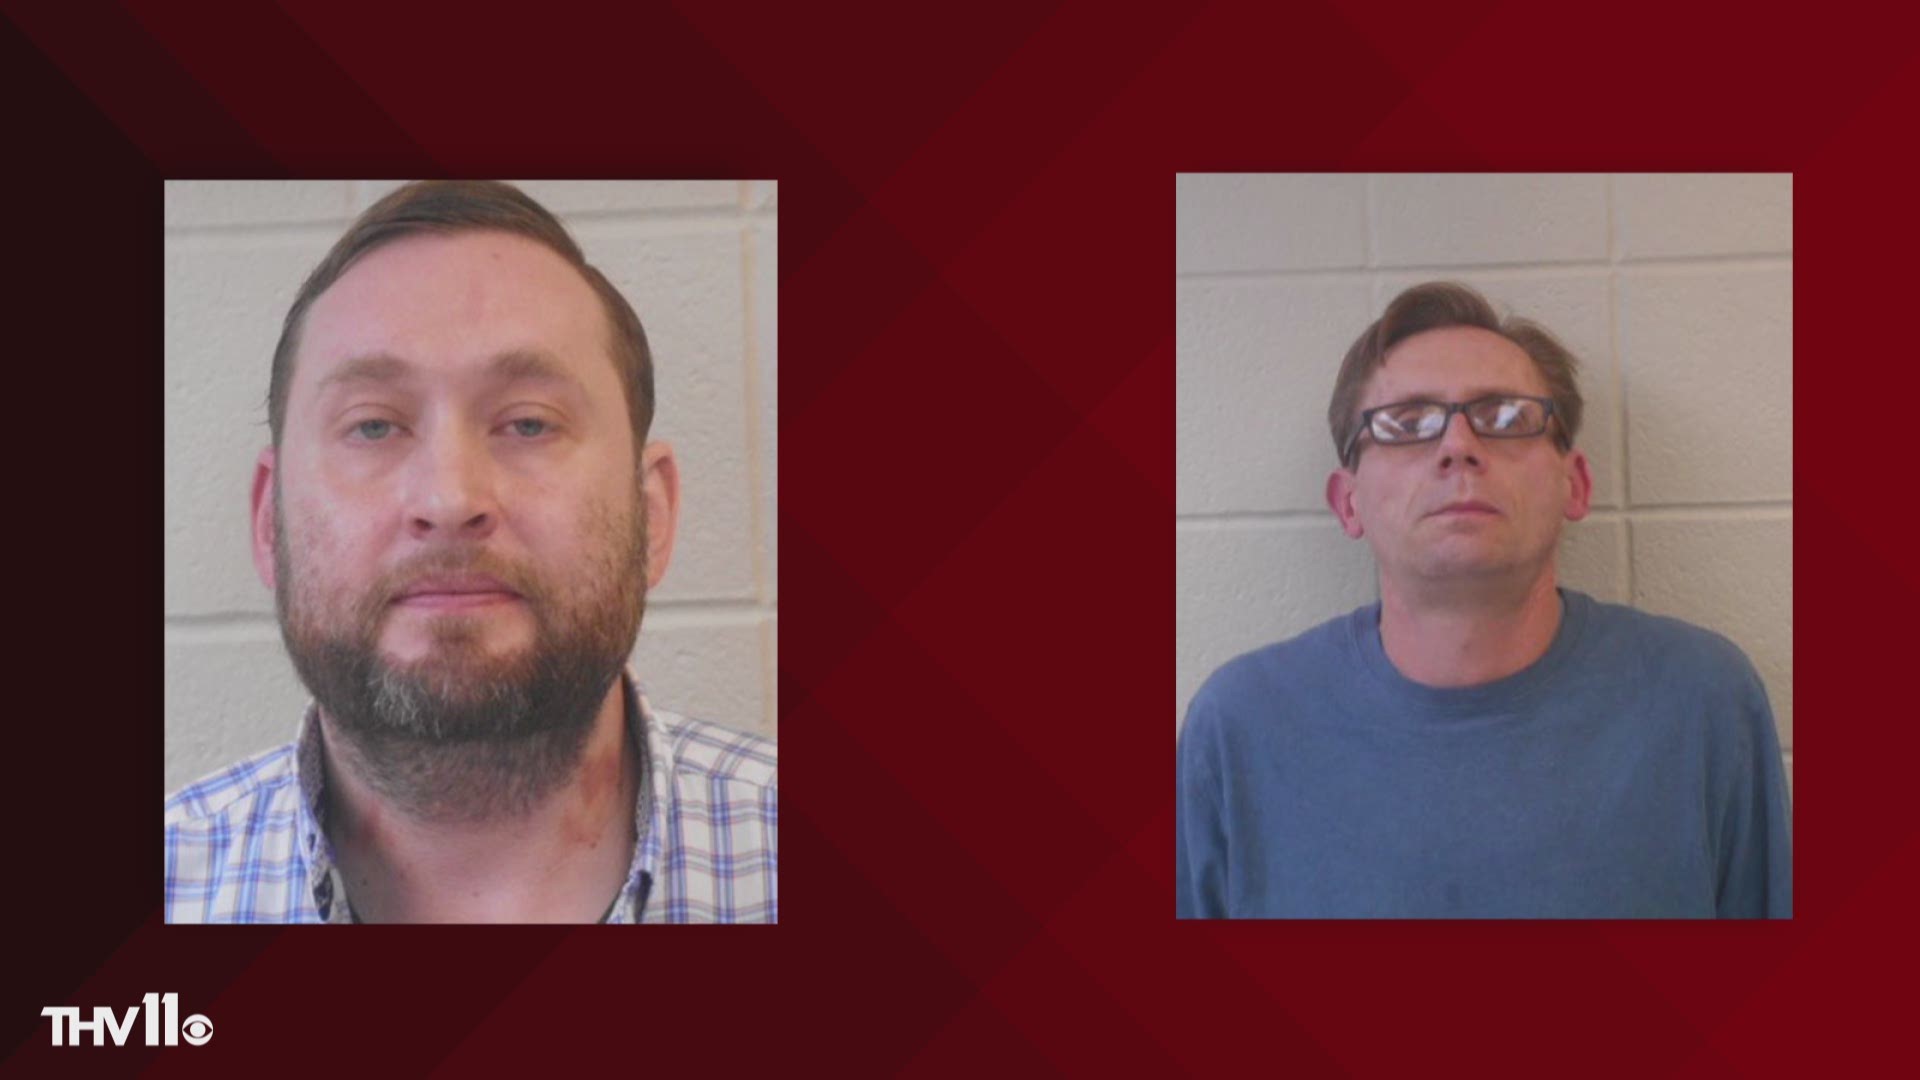 Two Henderson State University professors have been placed on administrative leave after evidence was found of manufacturing meth in the college science center.